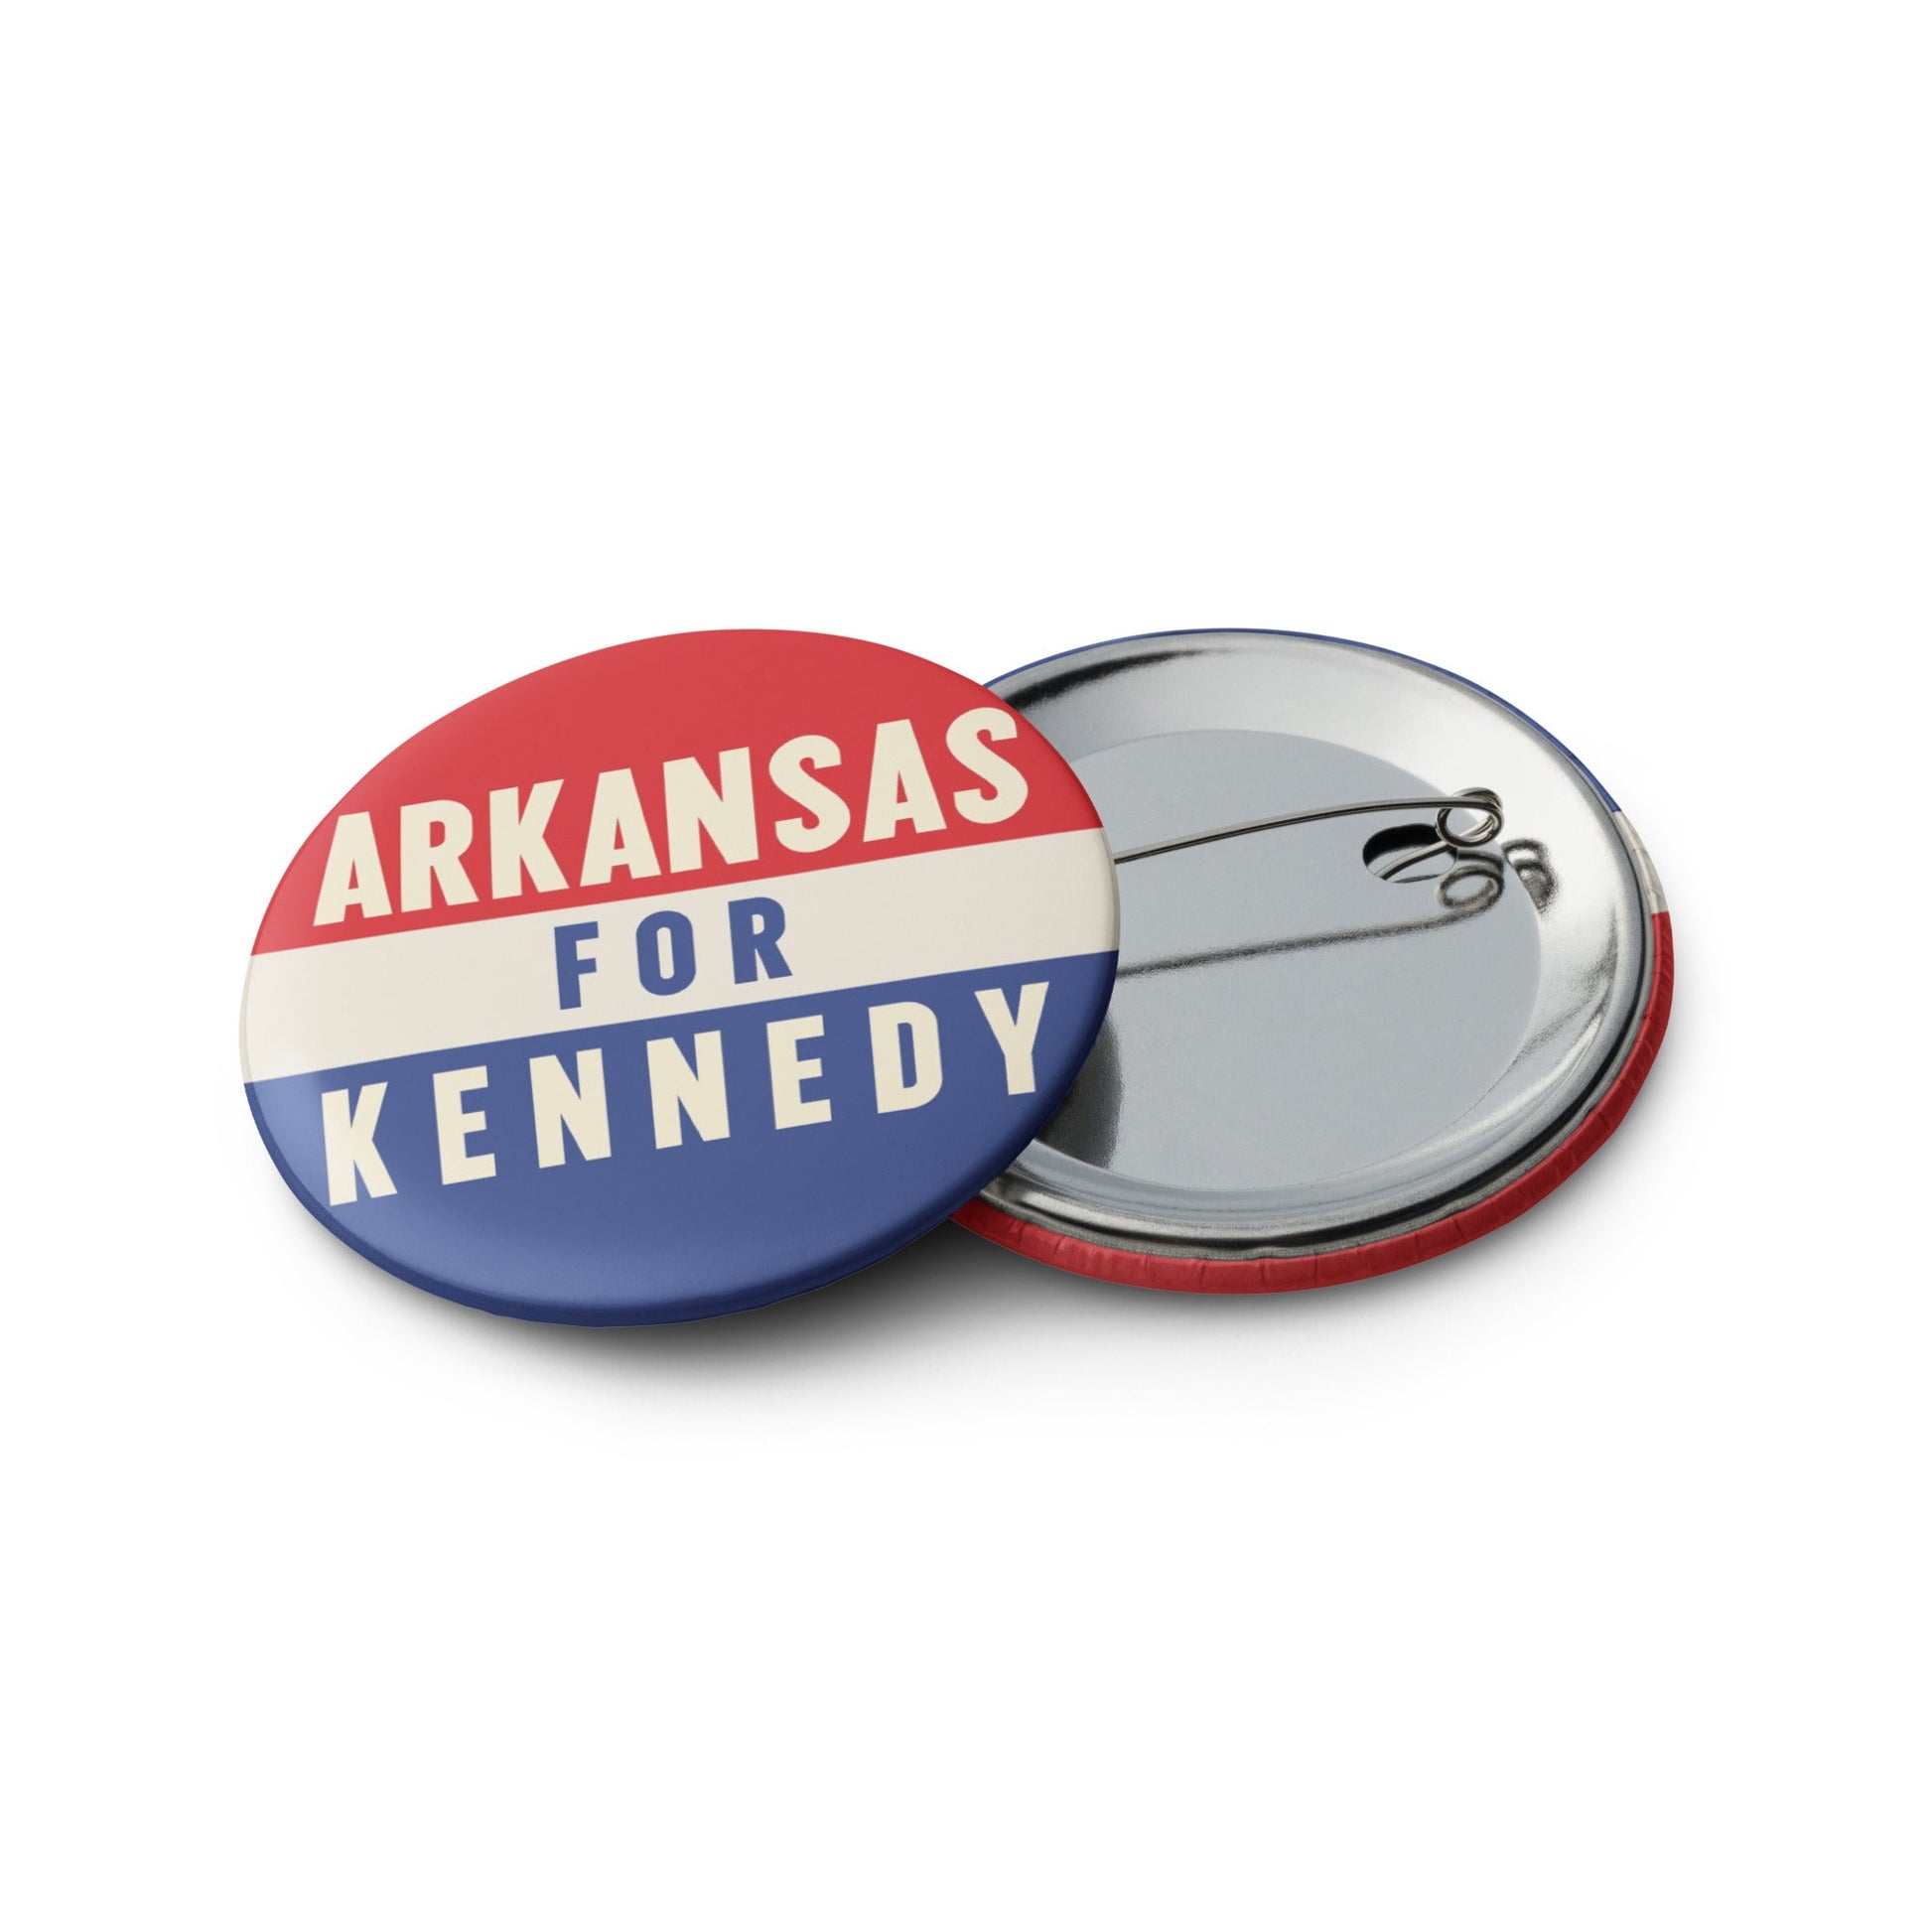 Arkansas for Kennedy (5 Buttons) - TEAM KENNEDY. All rights reserved